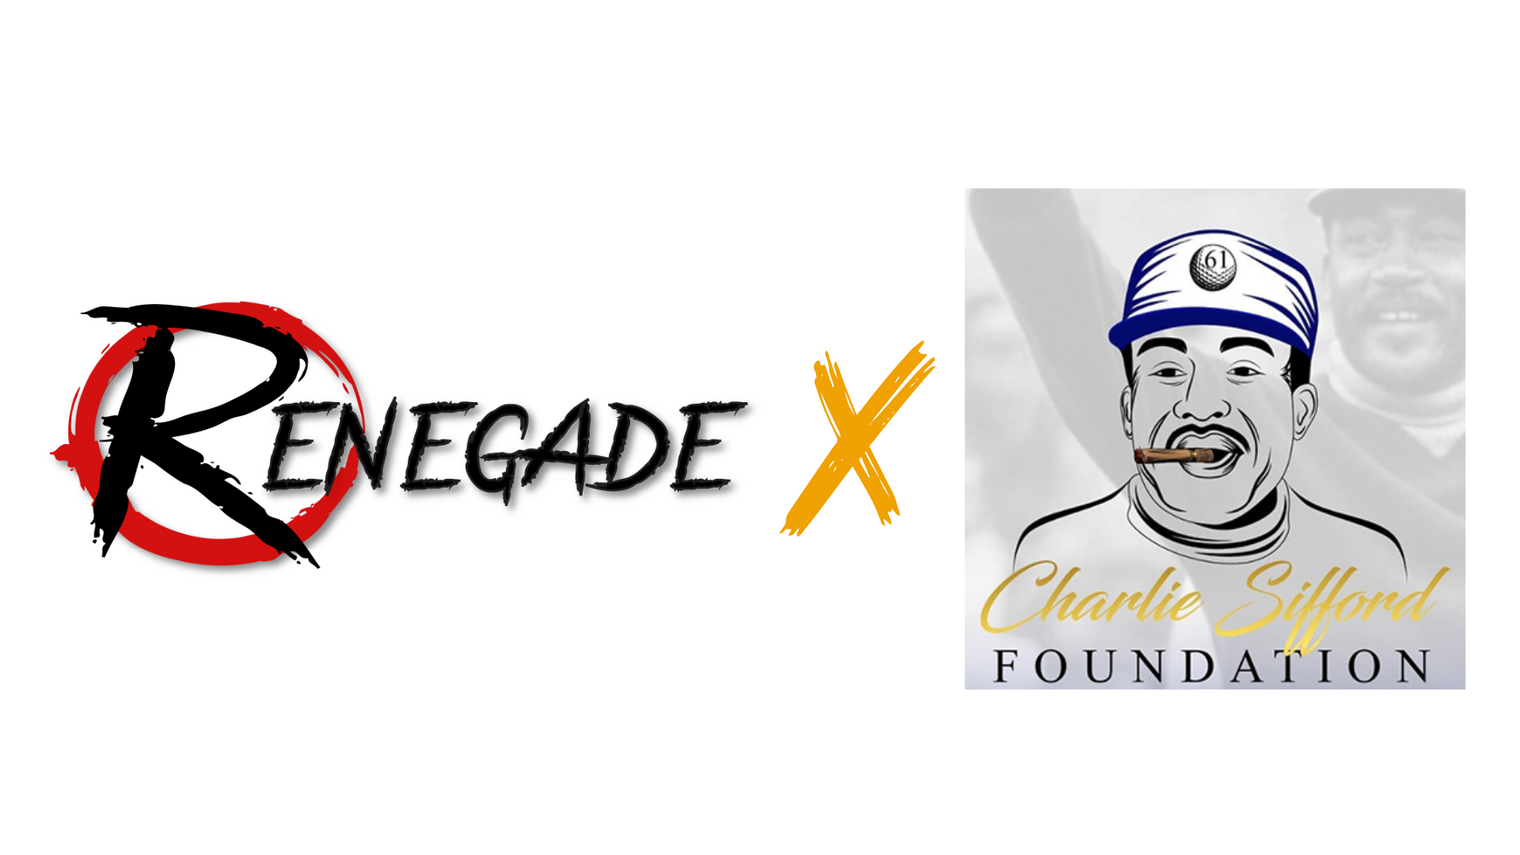 RENEGADE GOLF CELEBRATES HISTORY AND HONORS GOLF LEGEND DR. CHARLIE SIFFORD